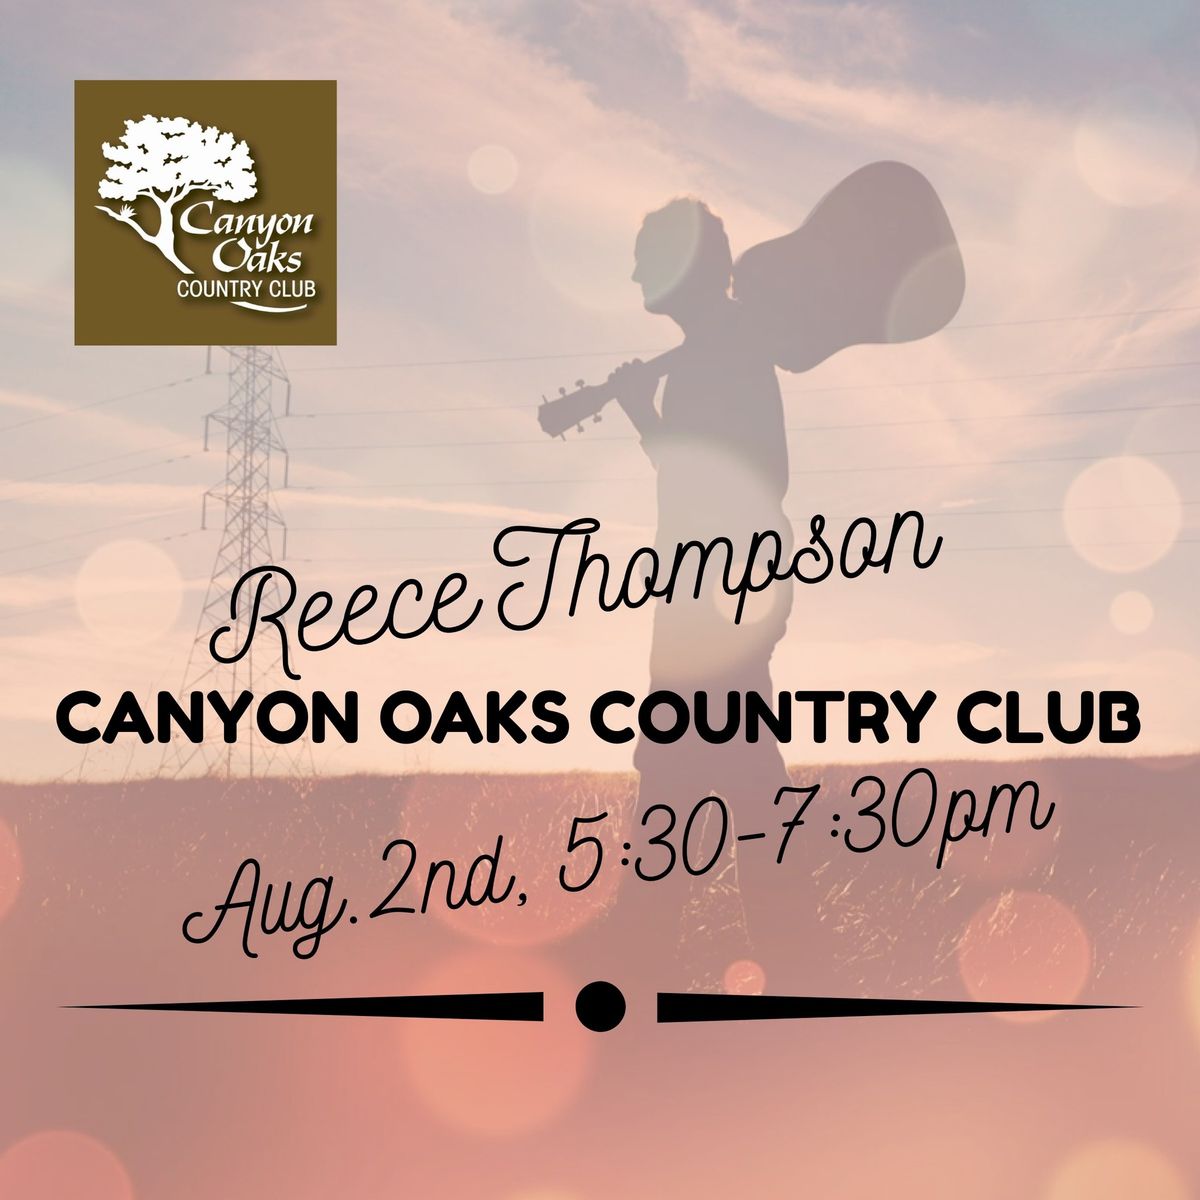 Canyon Oaks Country Club ft. Live Music by Reece Thompson 